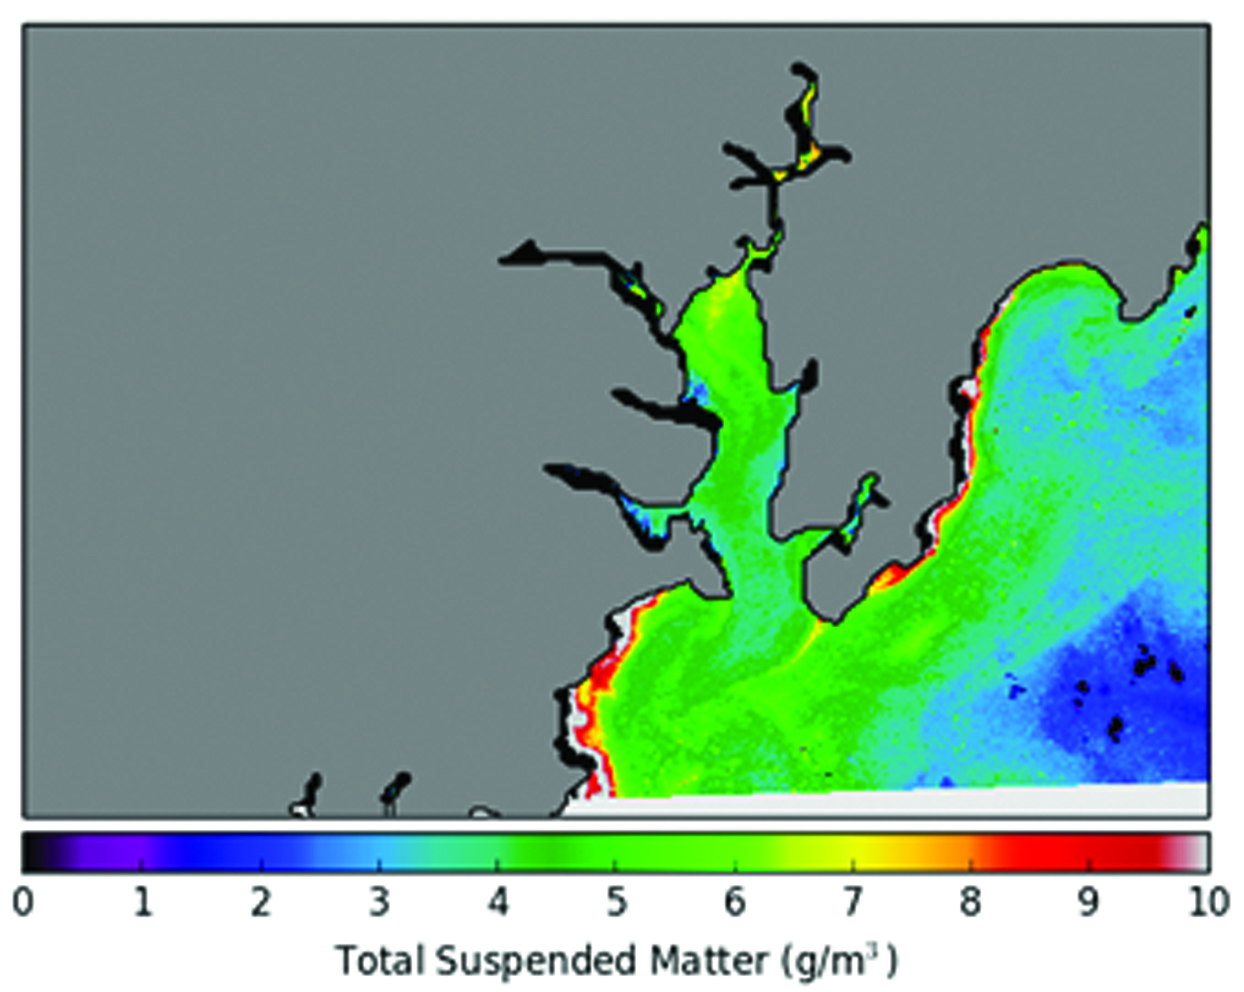 River plume extent determined using Landsat 8 data and image classification techniques. Estimates of suspended matter in the Fal estuary